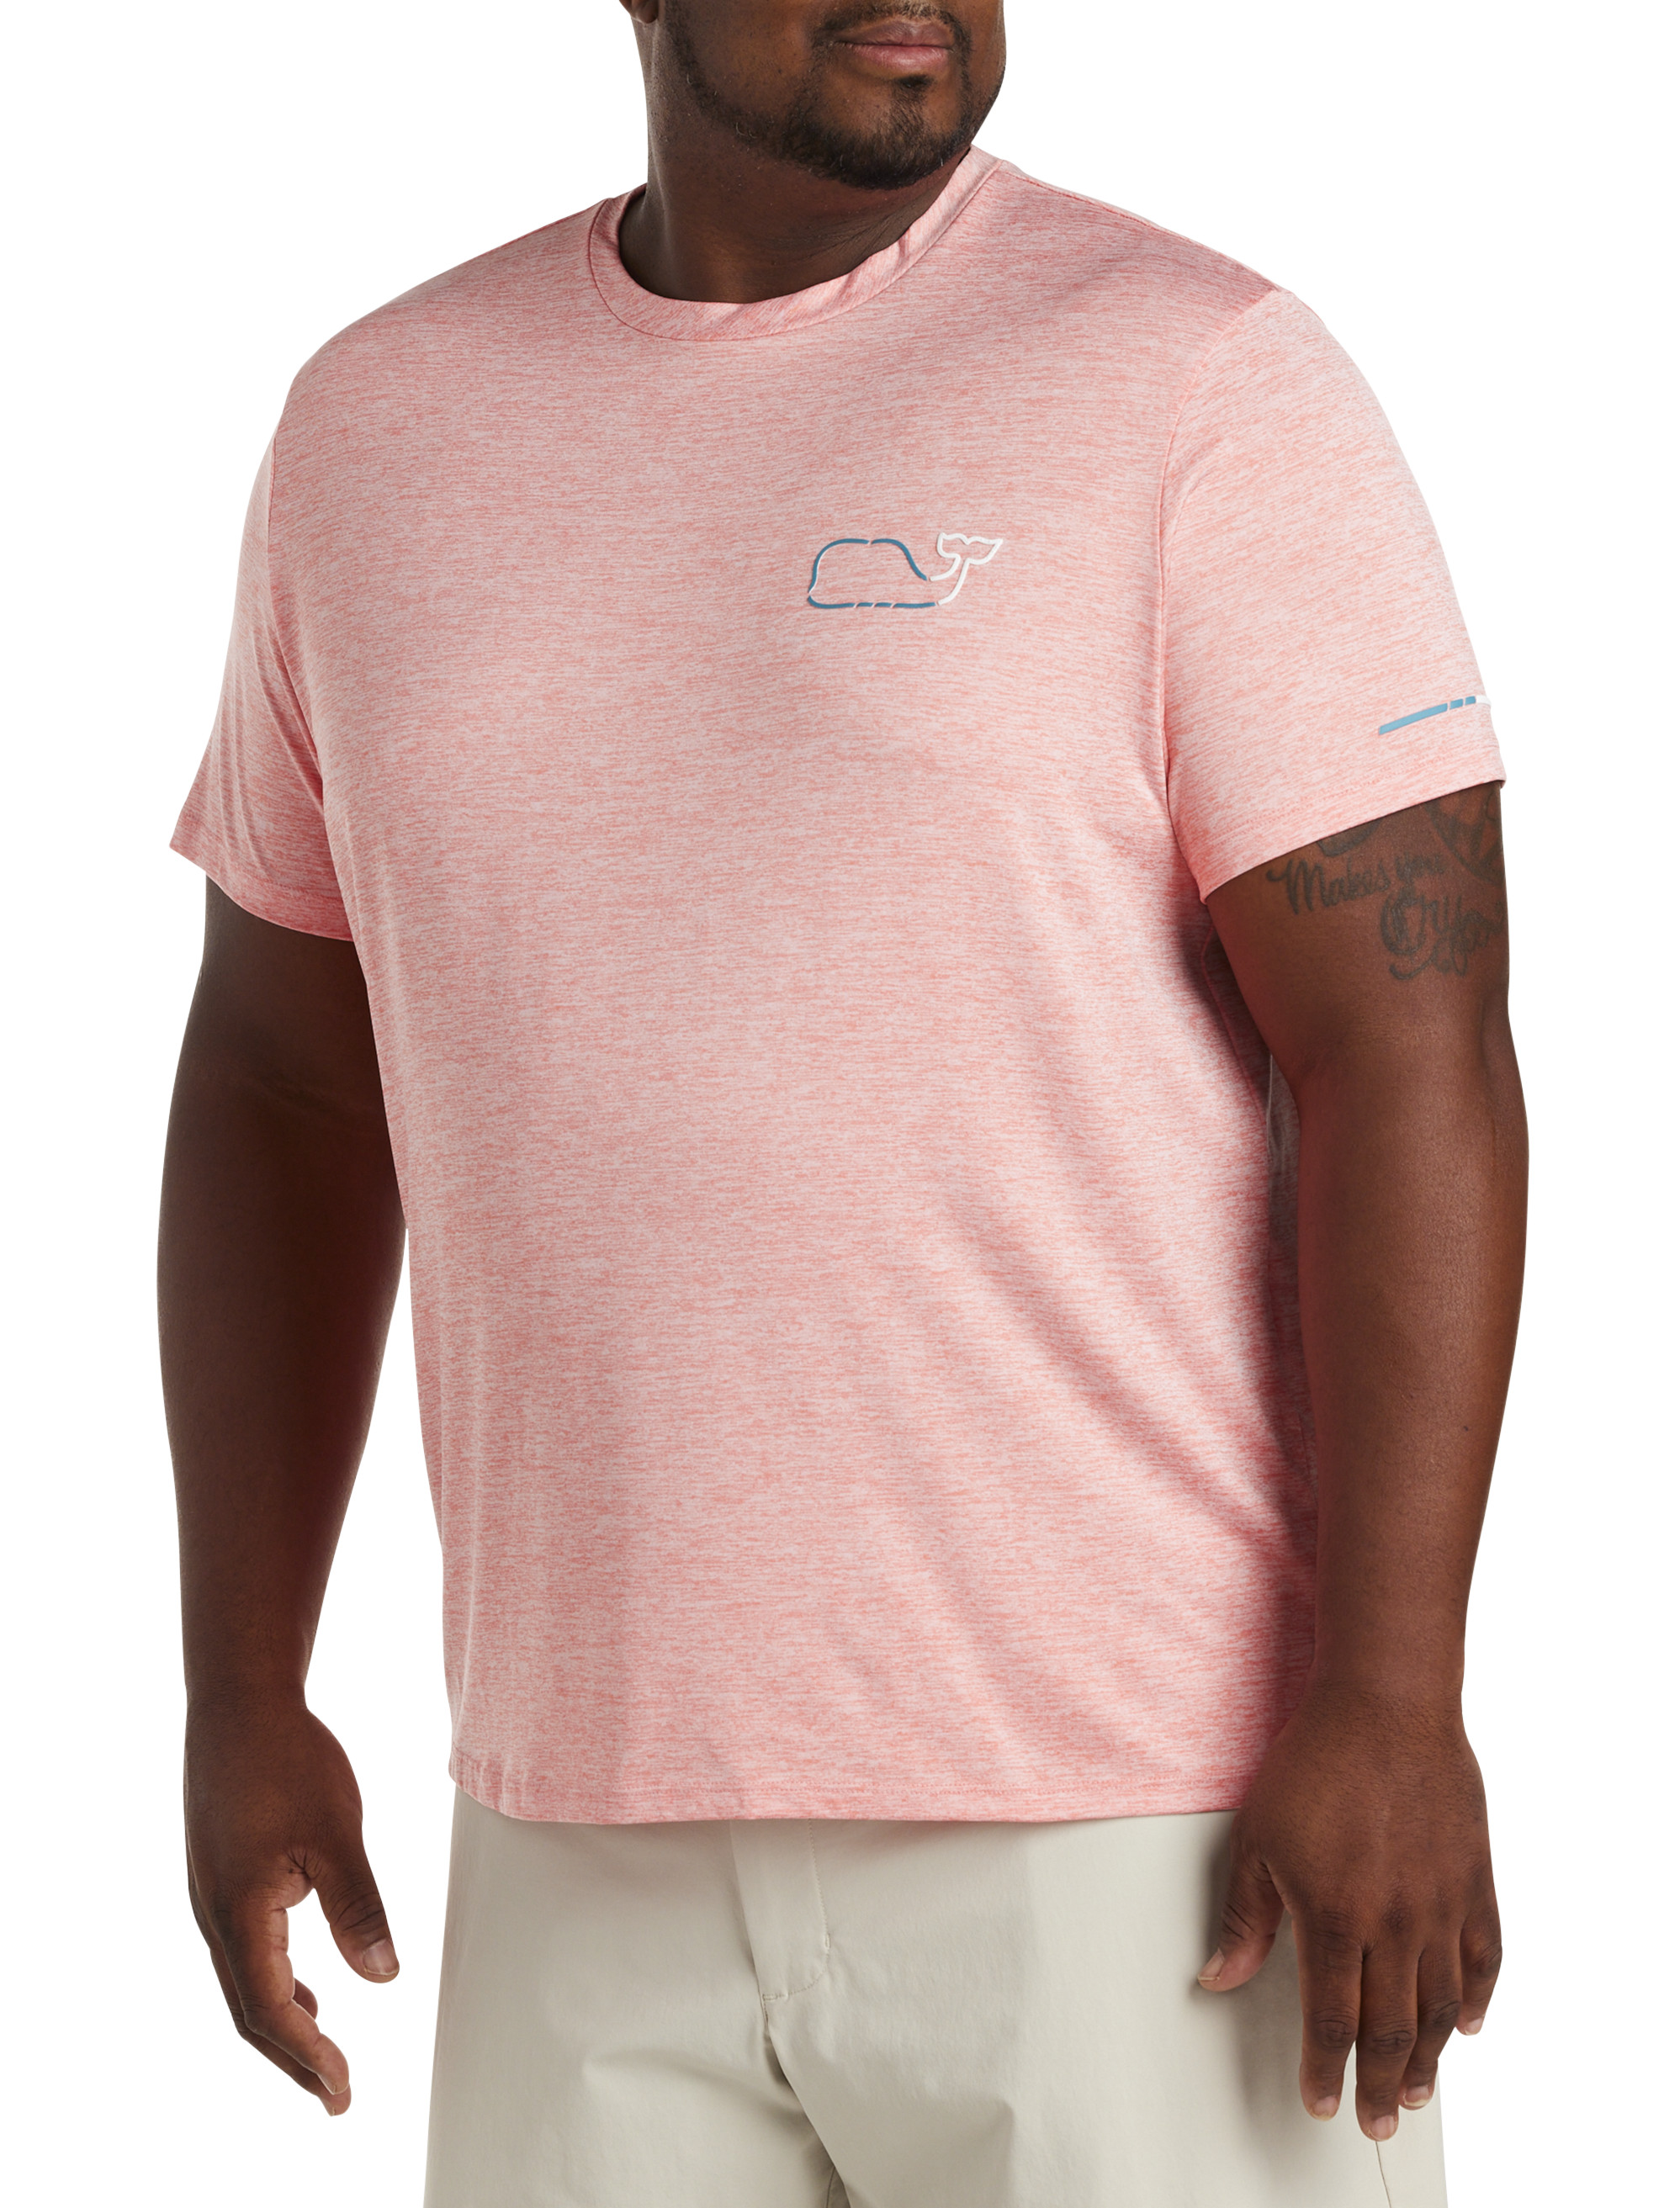 Whale Performance T-Shirt